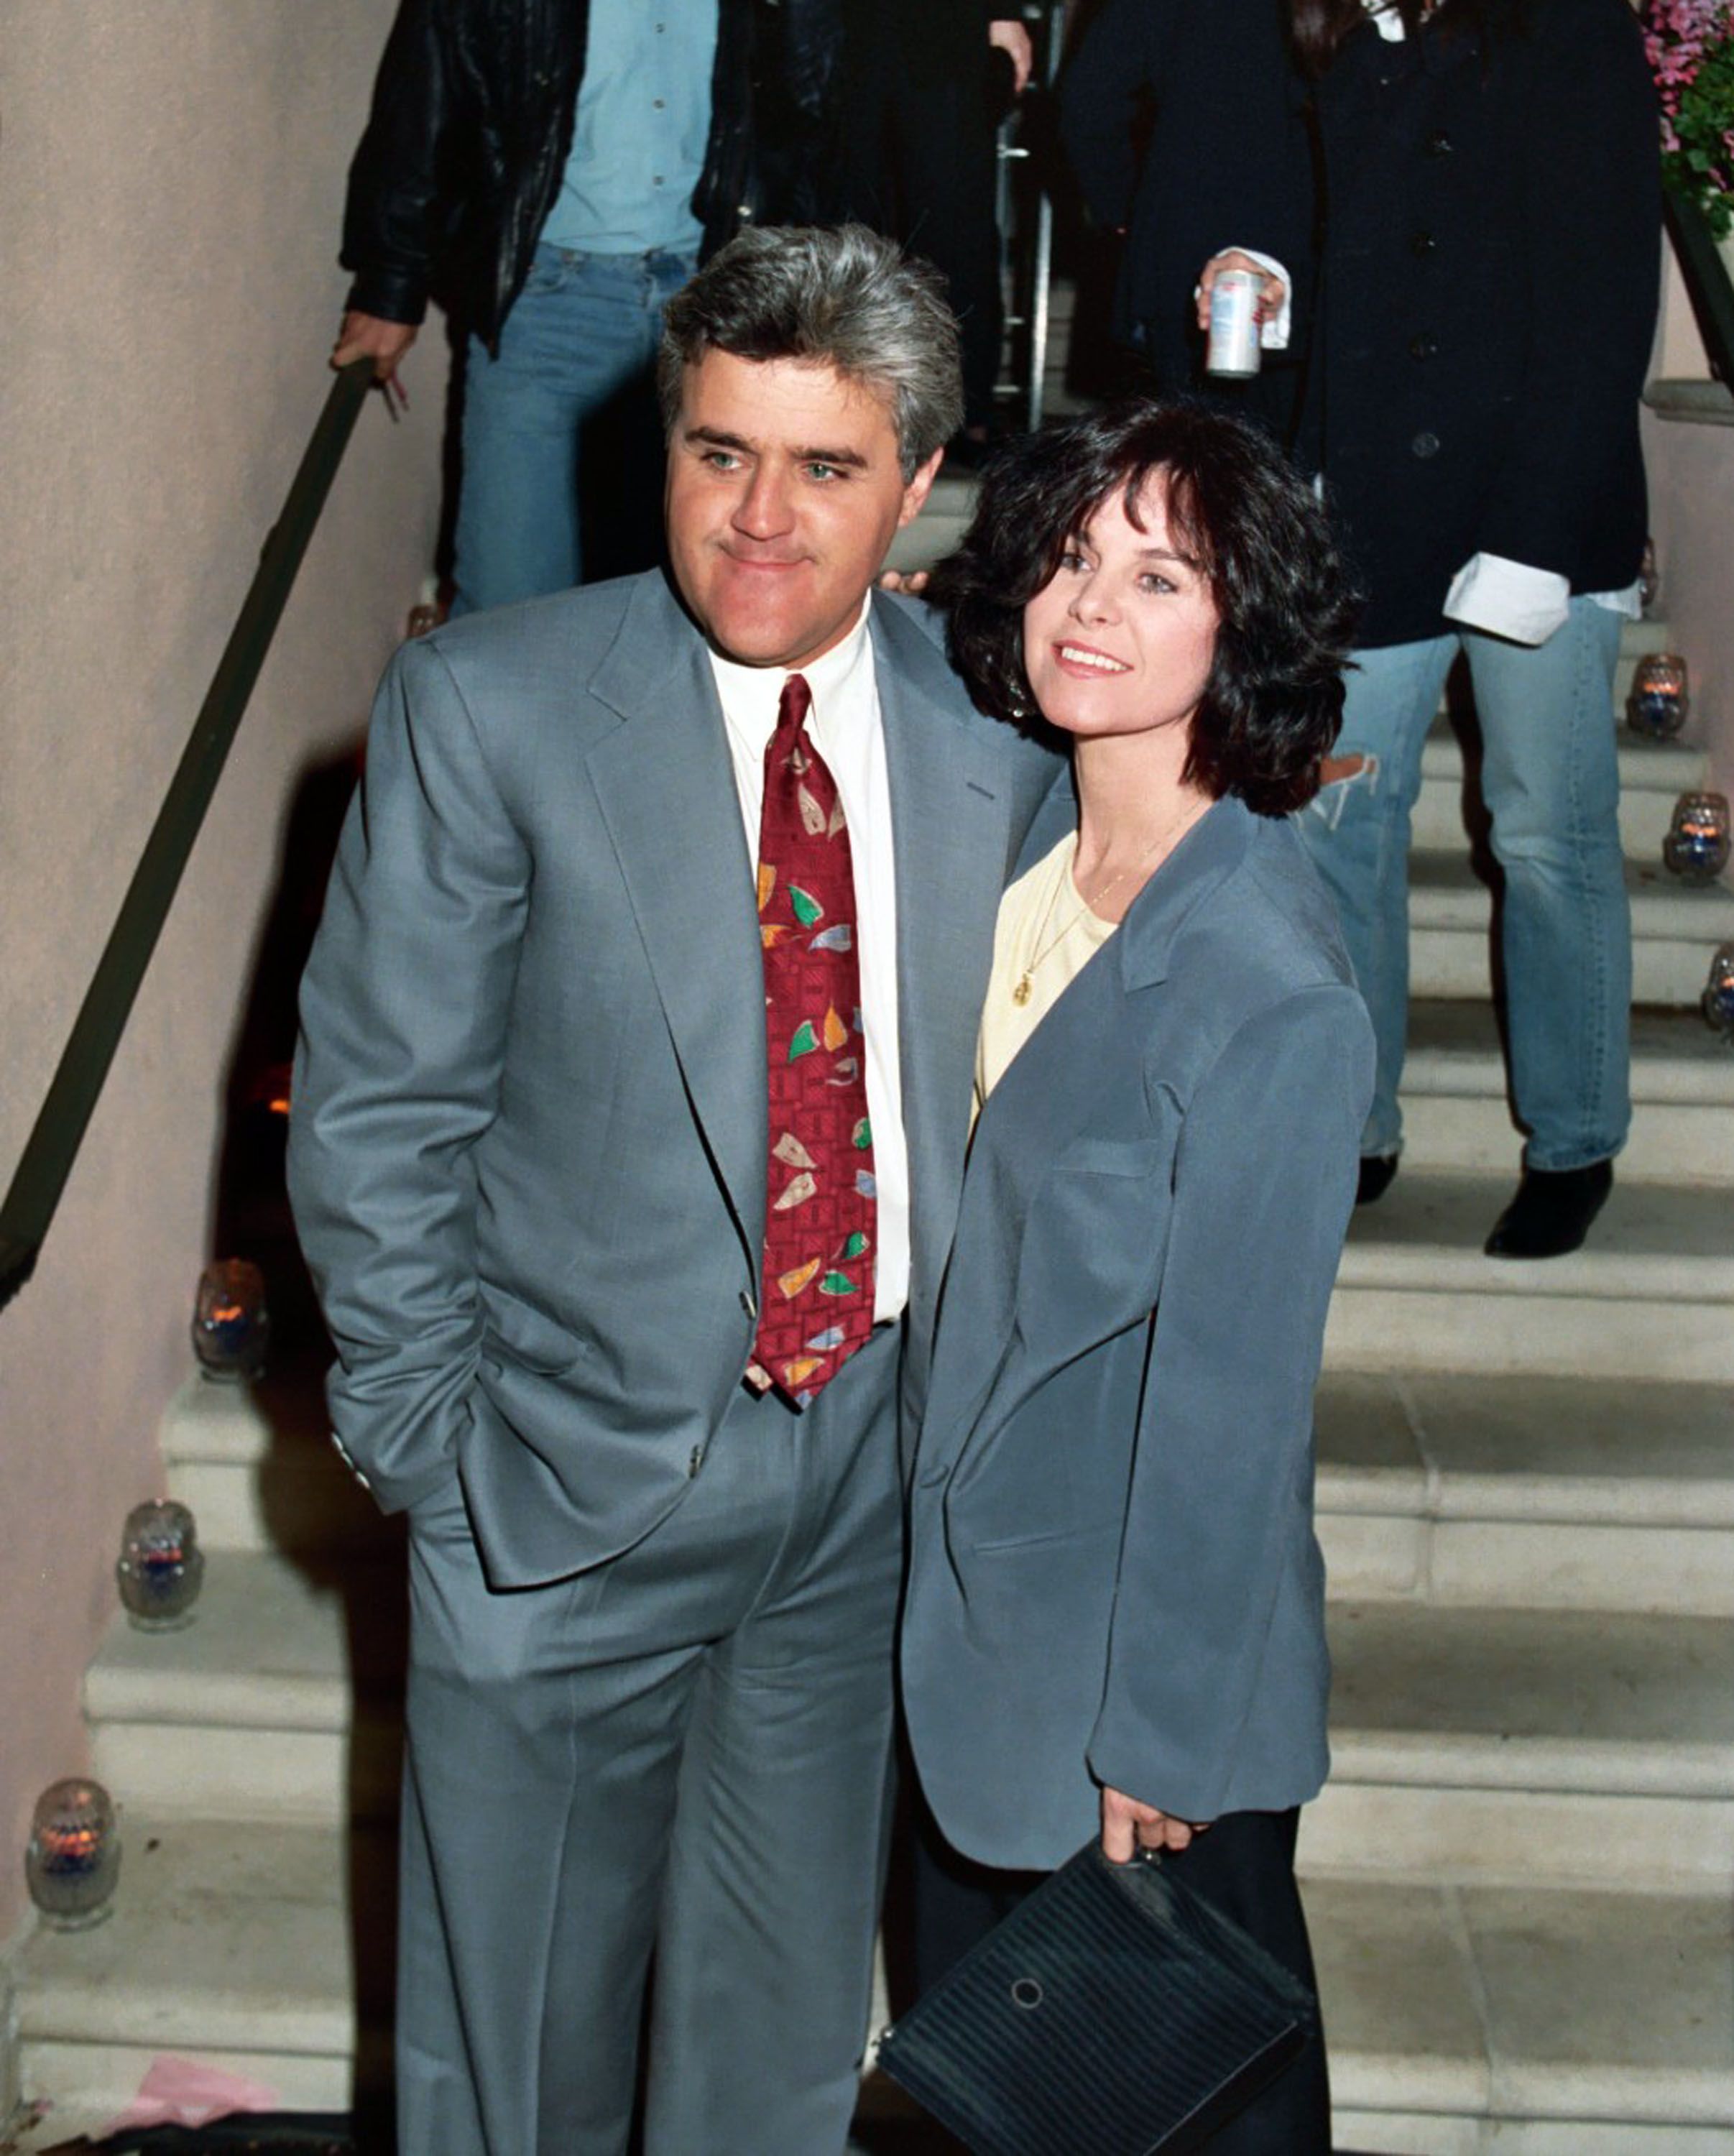 Jay and Mavis Leno during Poolside Cocktail Party for Kelly Klein's Book, "Pools" in Beverly Hills, California, on November 19, 1992. | Source: Jeff Kravitz/FilmMagic, Inc/Getty Images